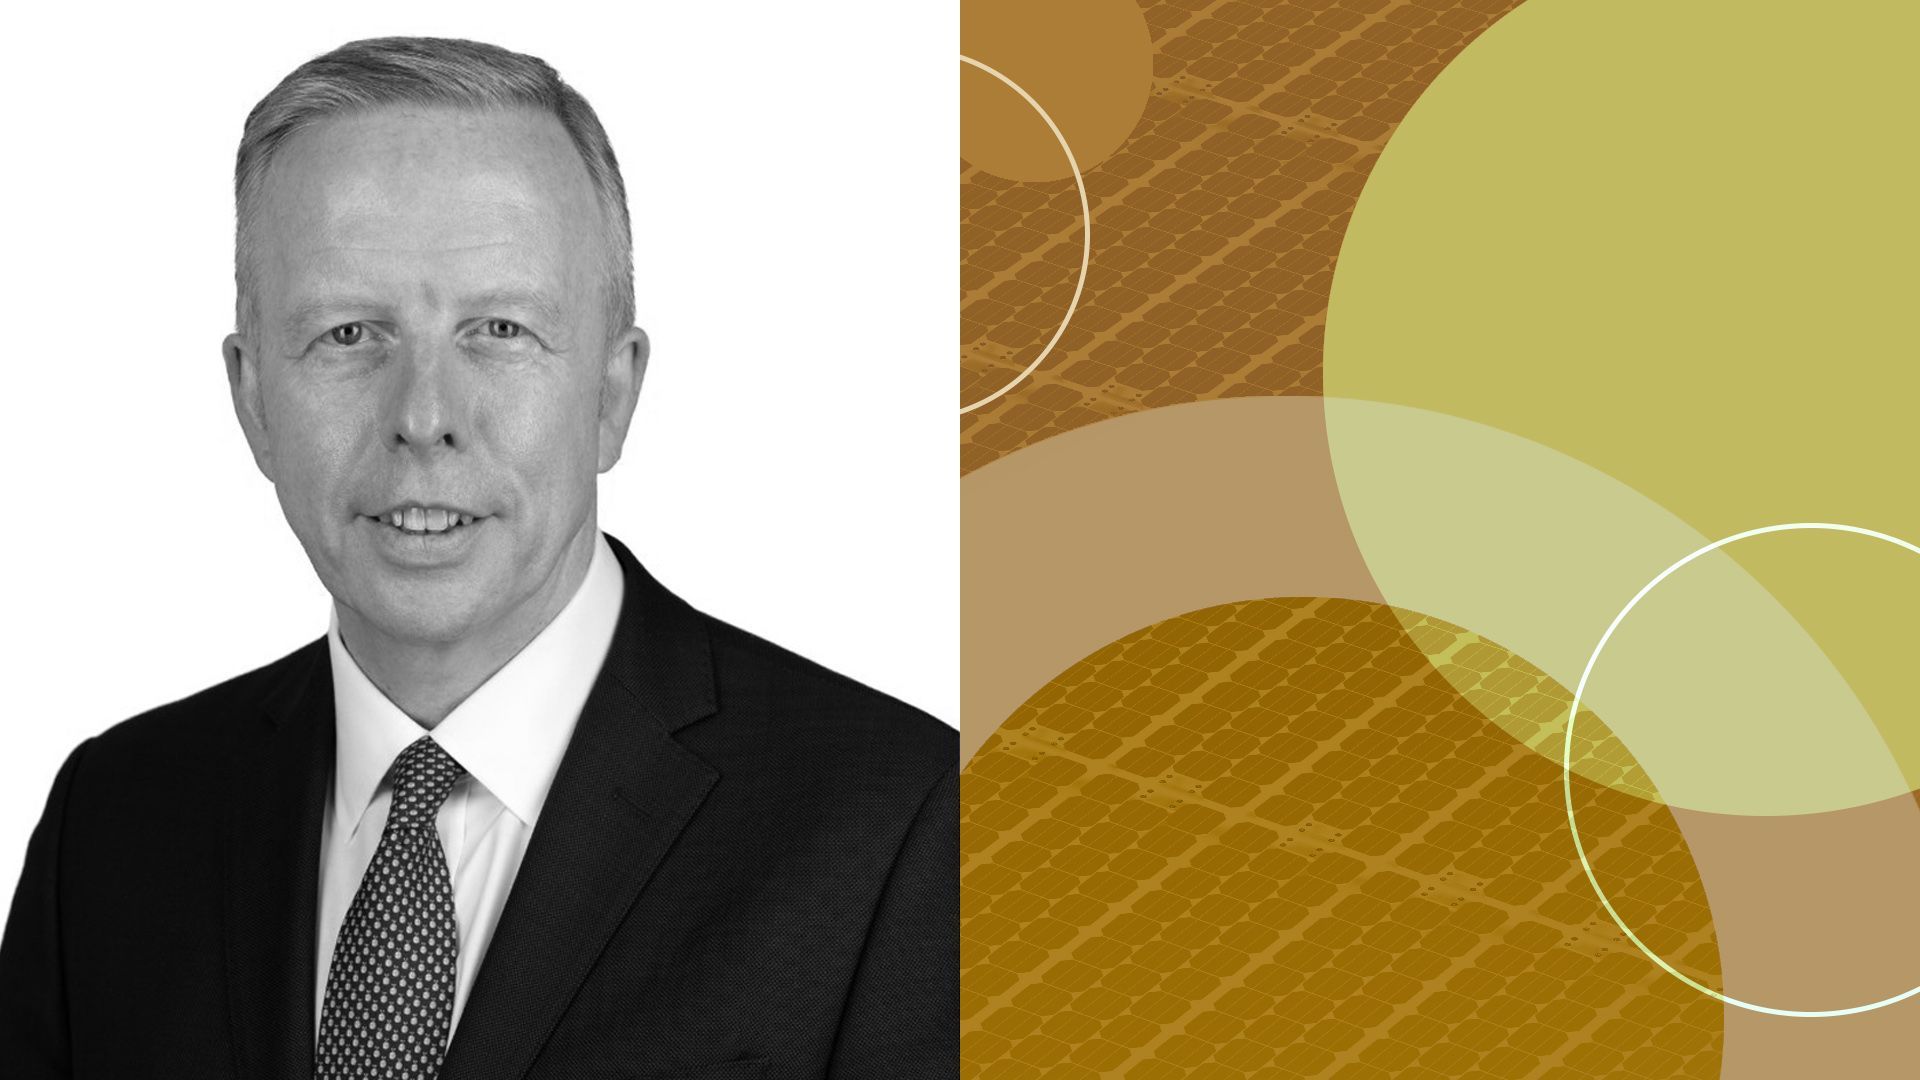 photo illustration of Just Climate chief investment officer Shaun Kingsbury surrounded by circles and solar panel overlay